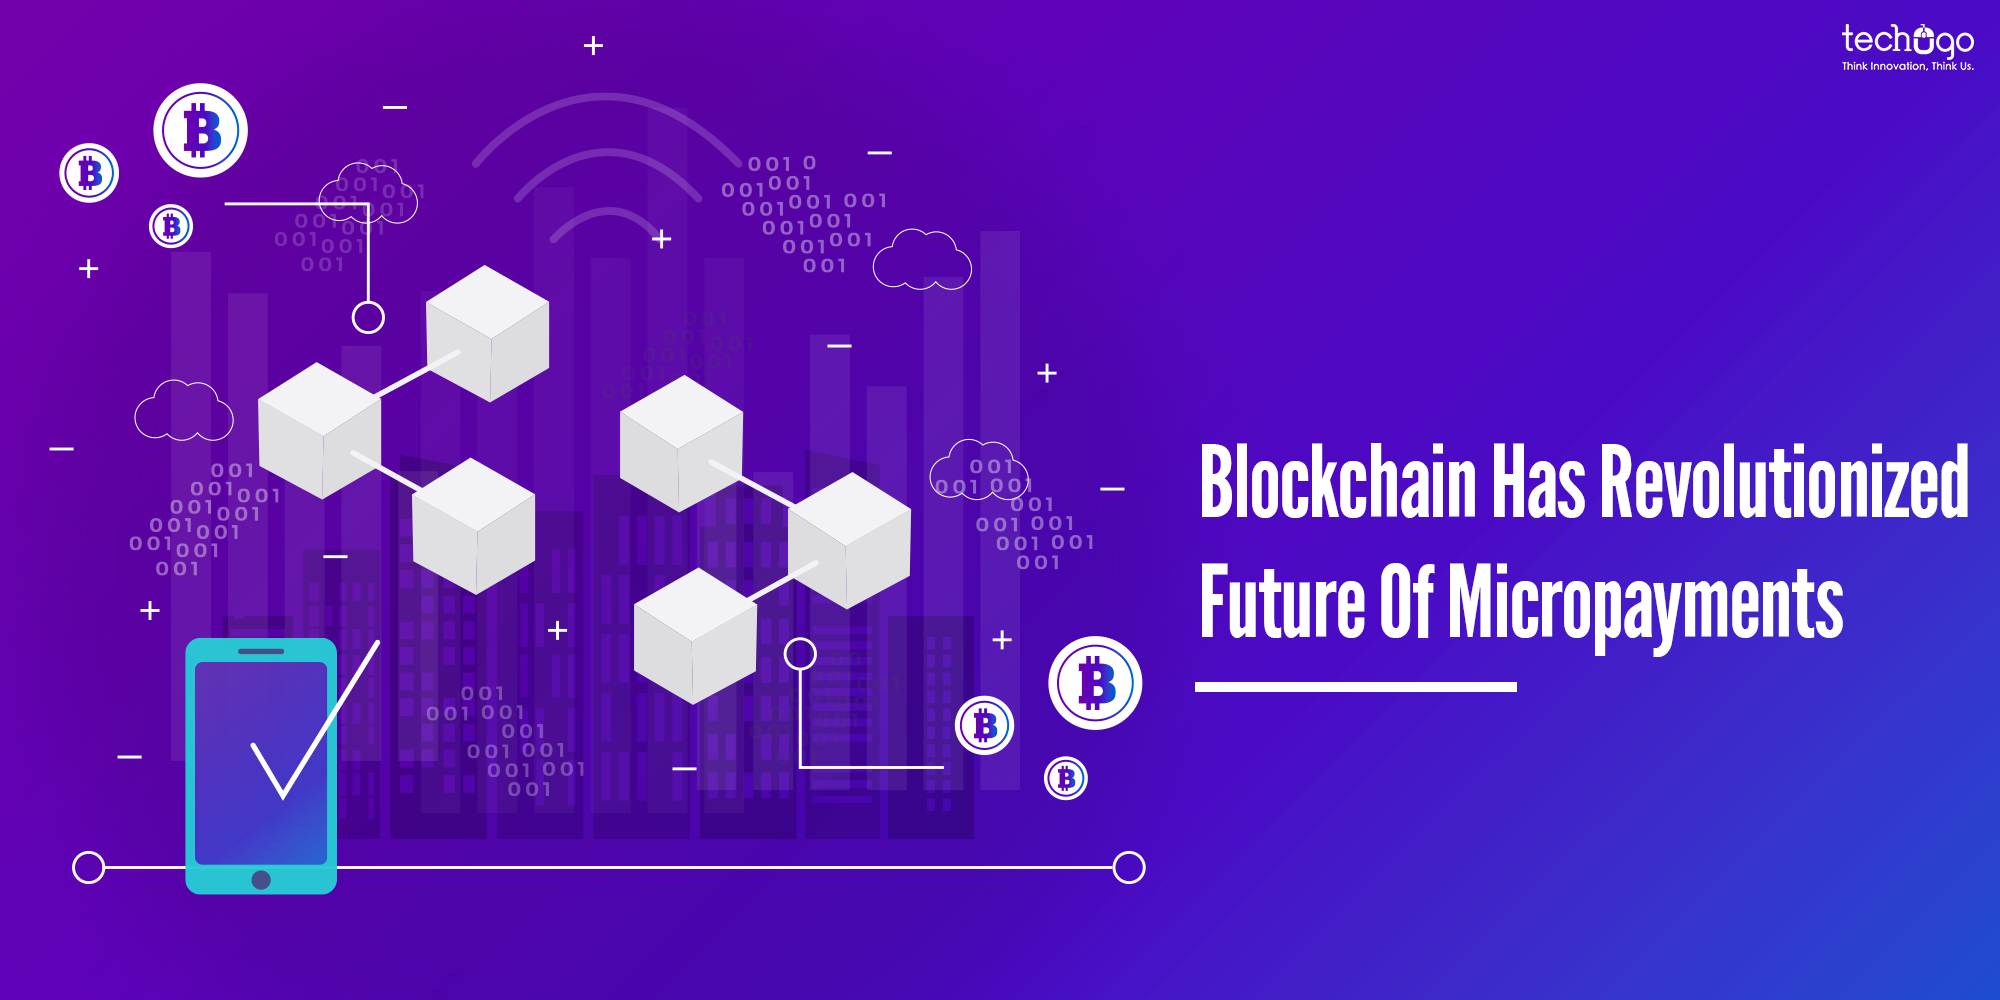 Blockchain Has Revolutionized The Future Of Micropayments